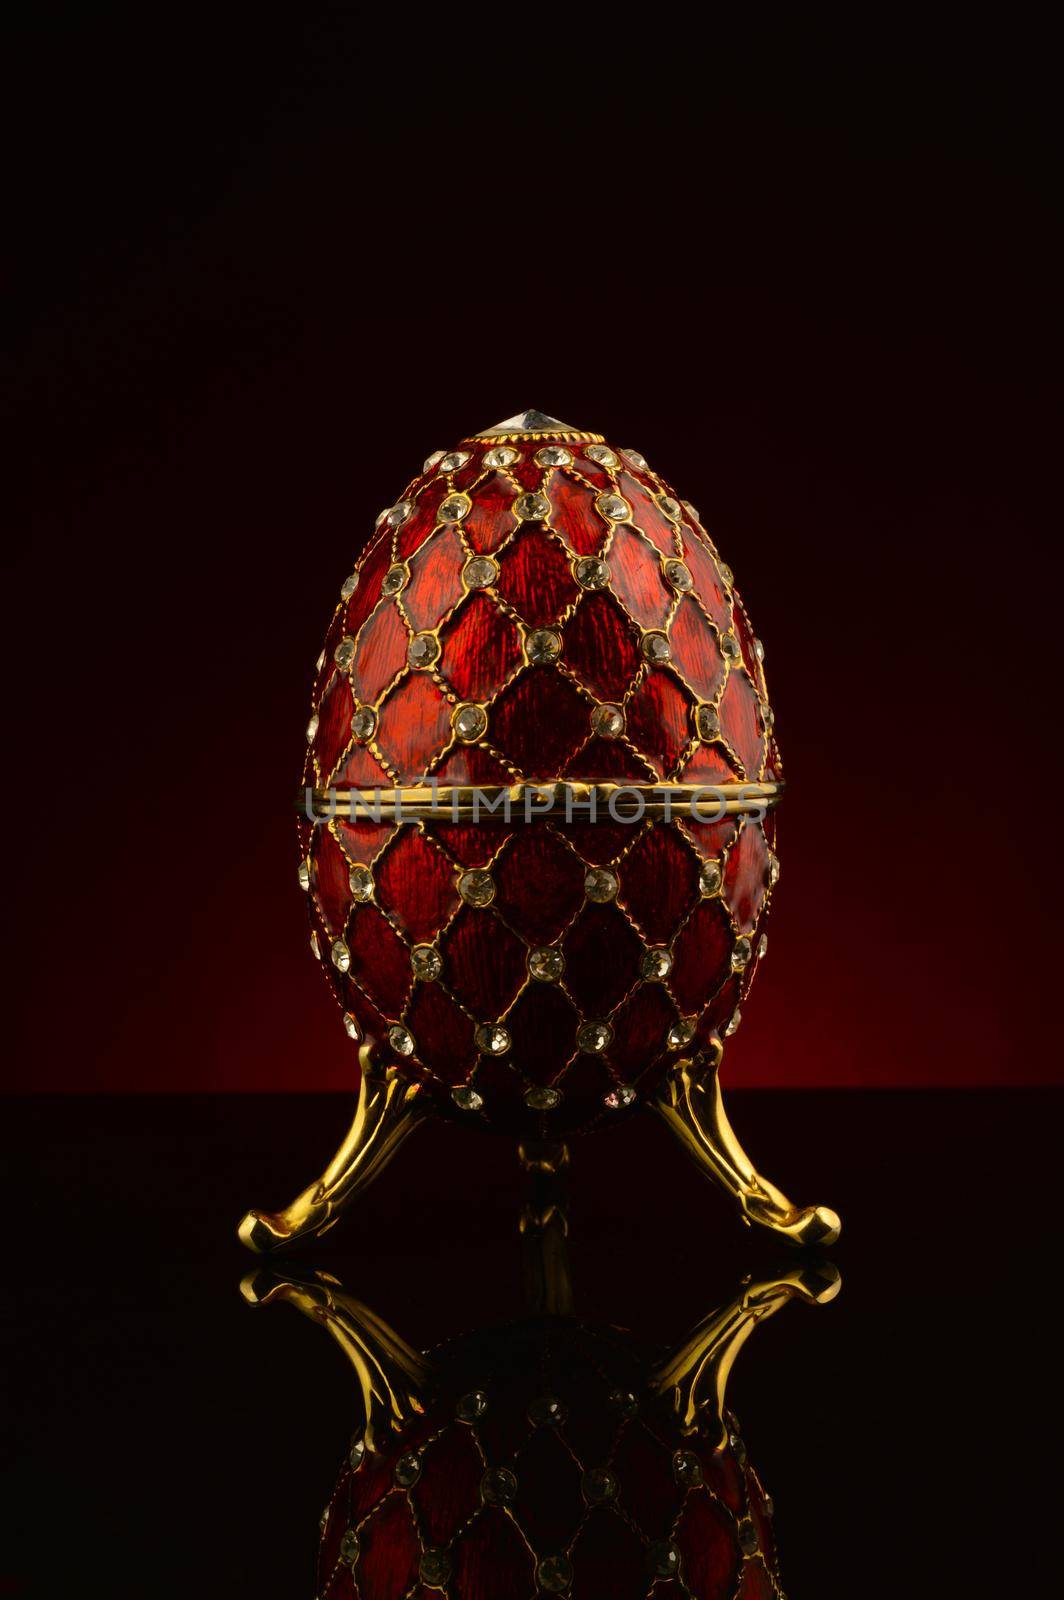 A faberge style egg focused over a dark red and black gradient background.